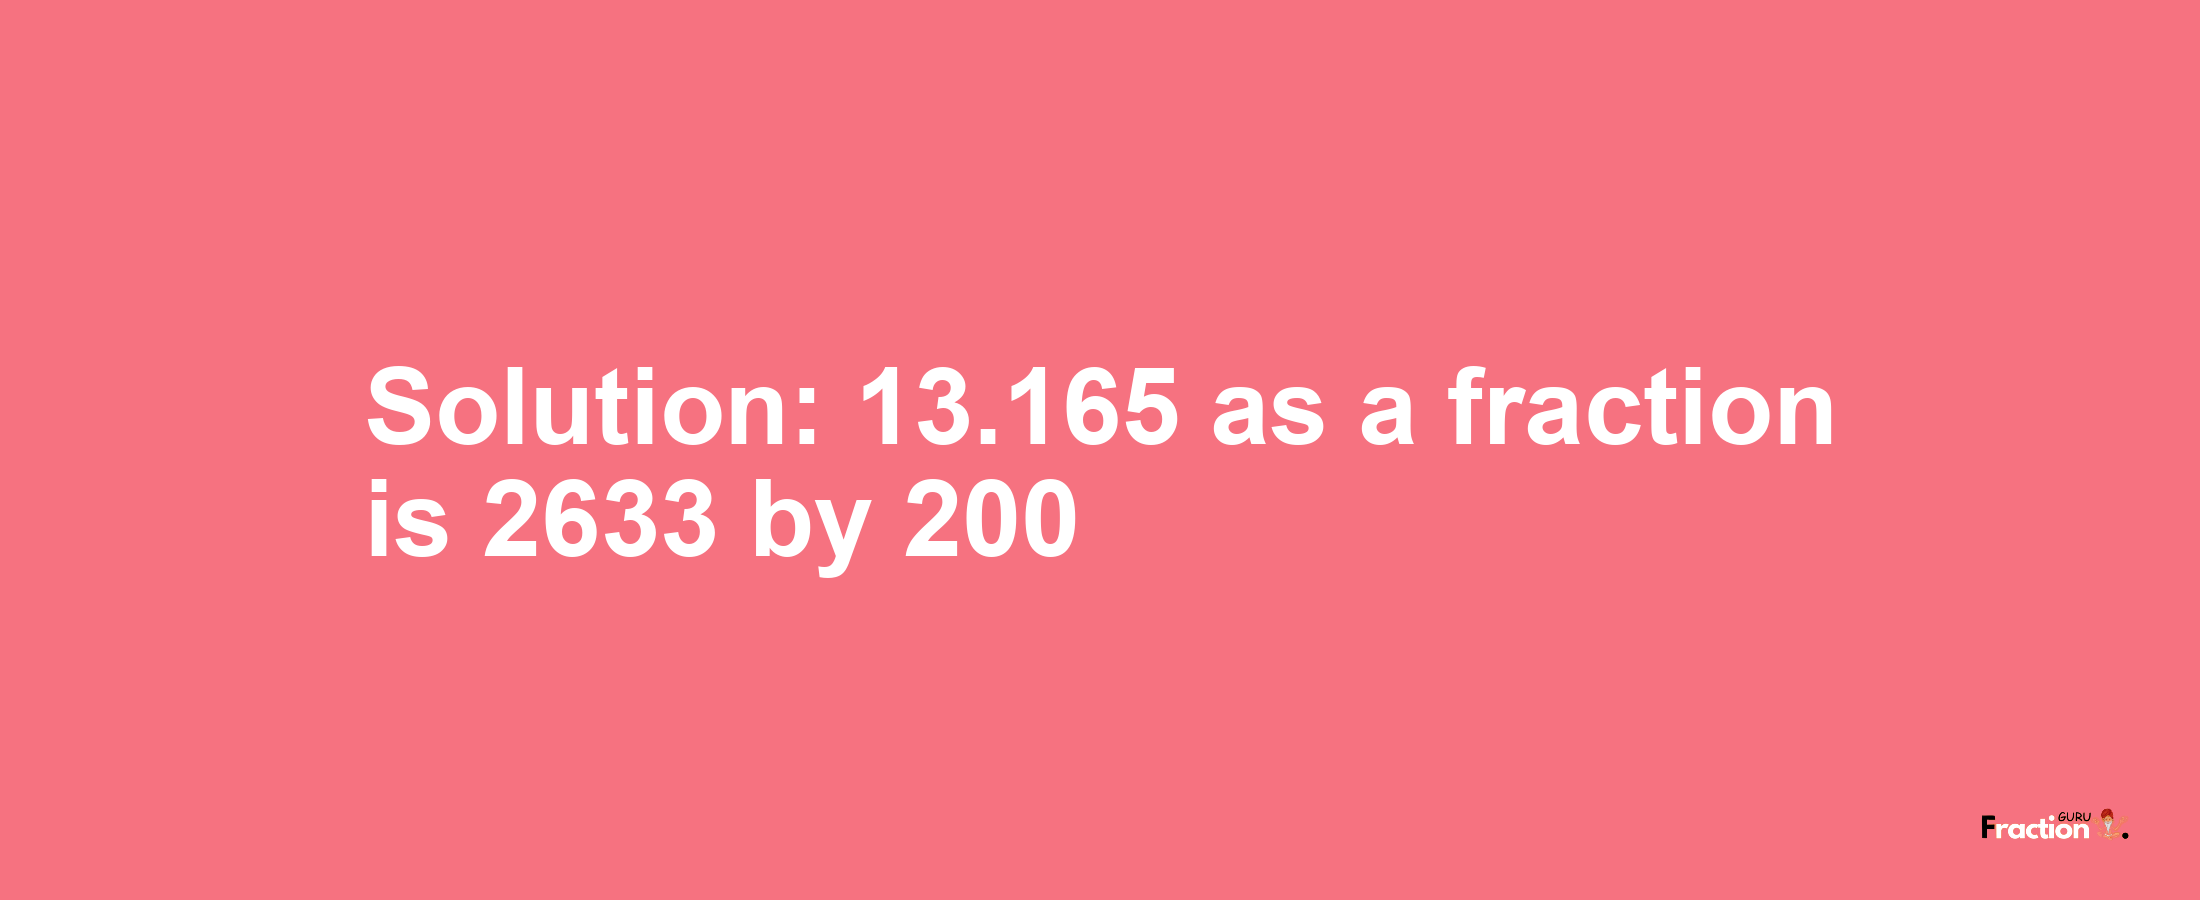 Solution:13.165 as a fraction is 2633/200